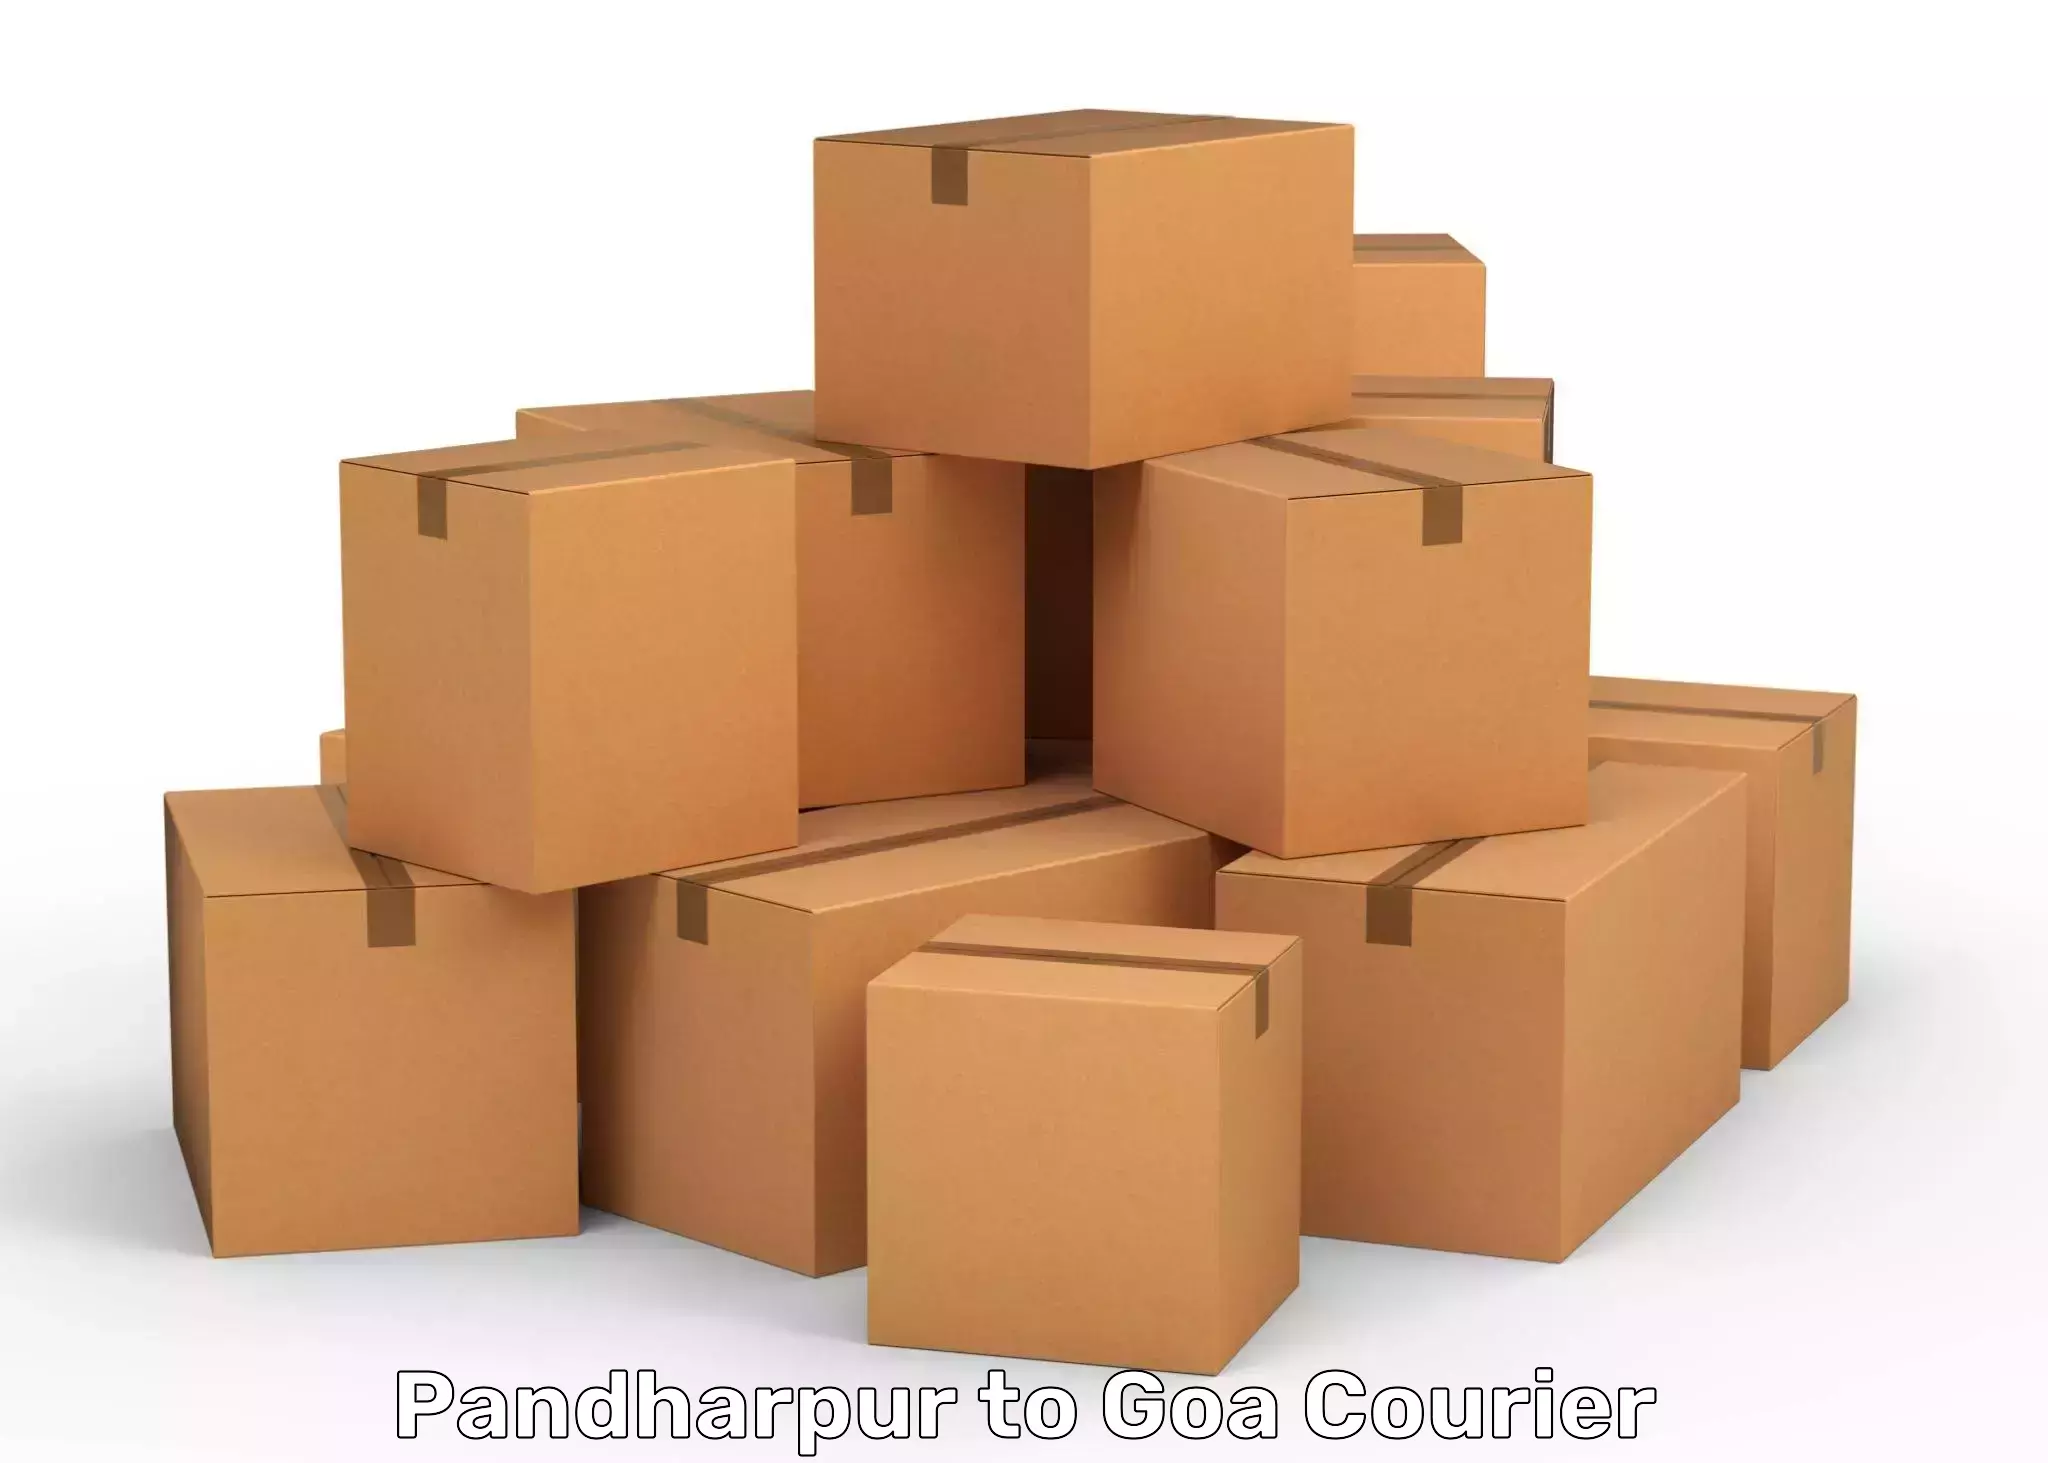 Cost-effective shipping solutions Pandharpur to Panaji